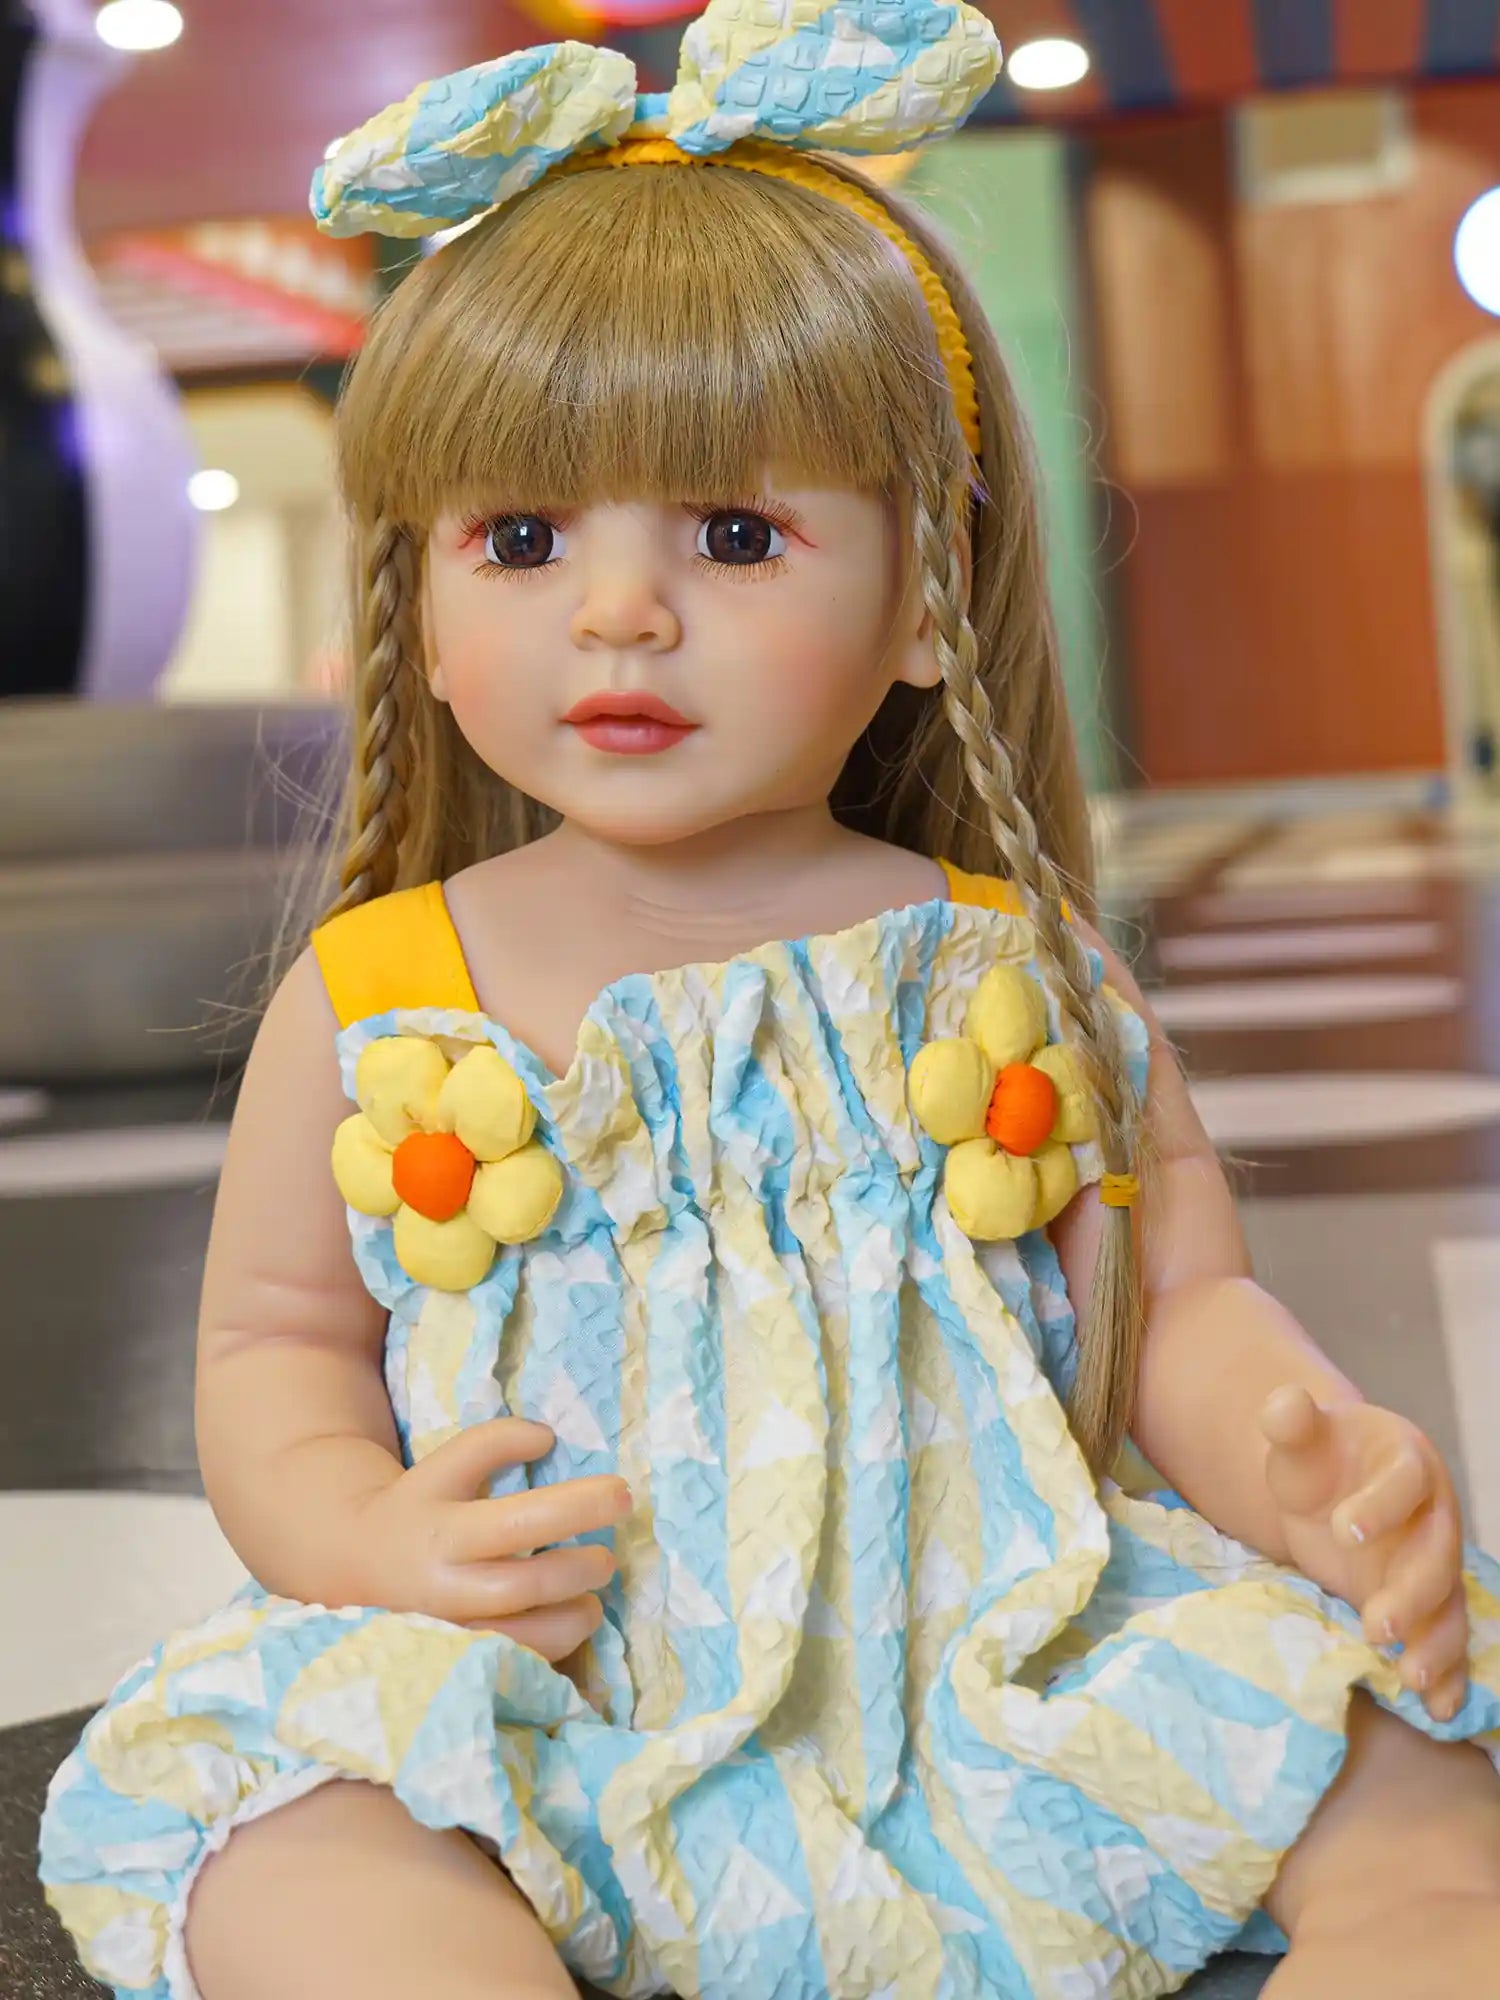 A doll in a textured blue dress with yellow details, seated on a gray floor.